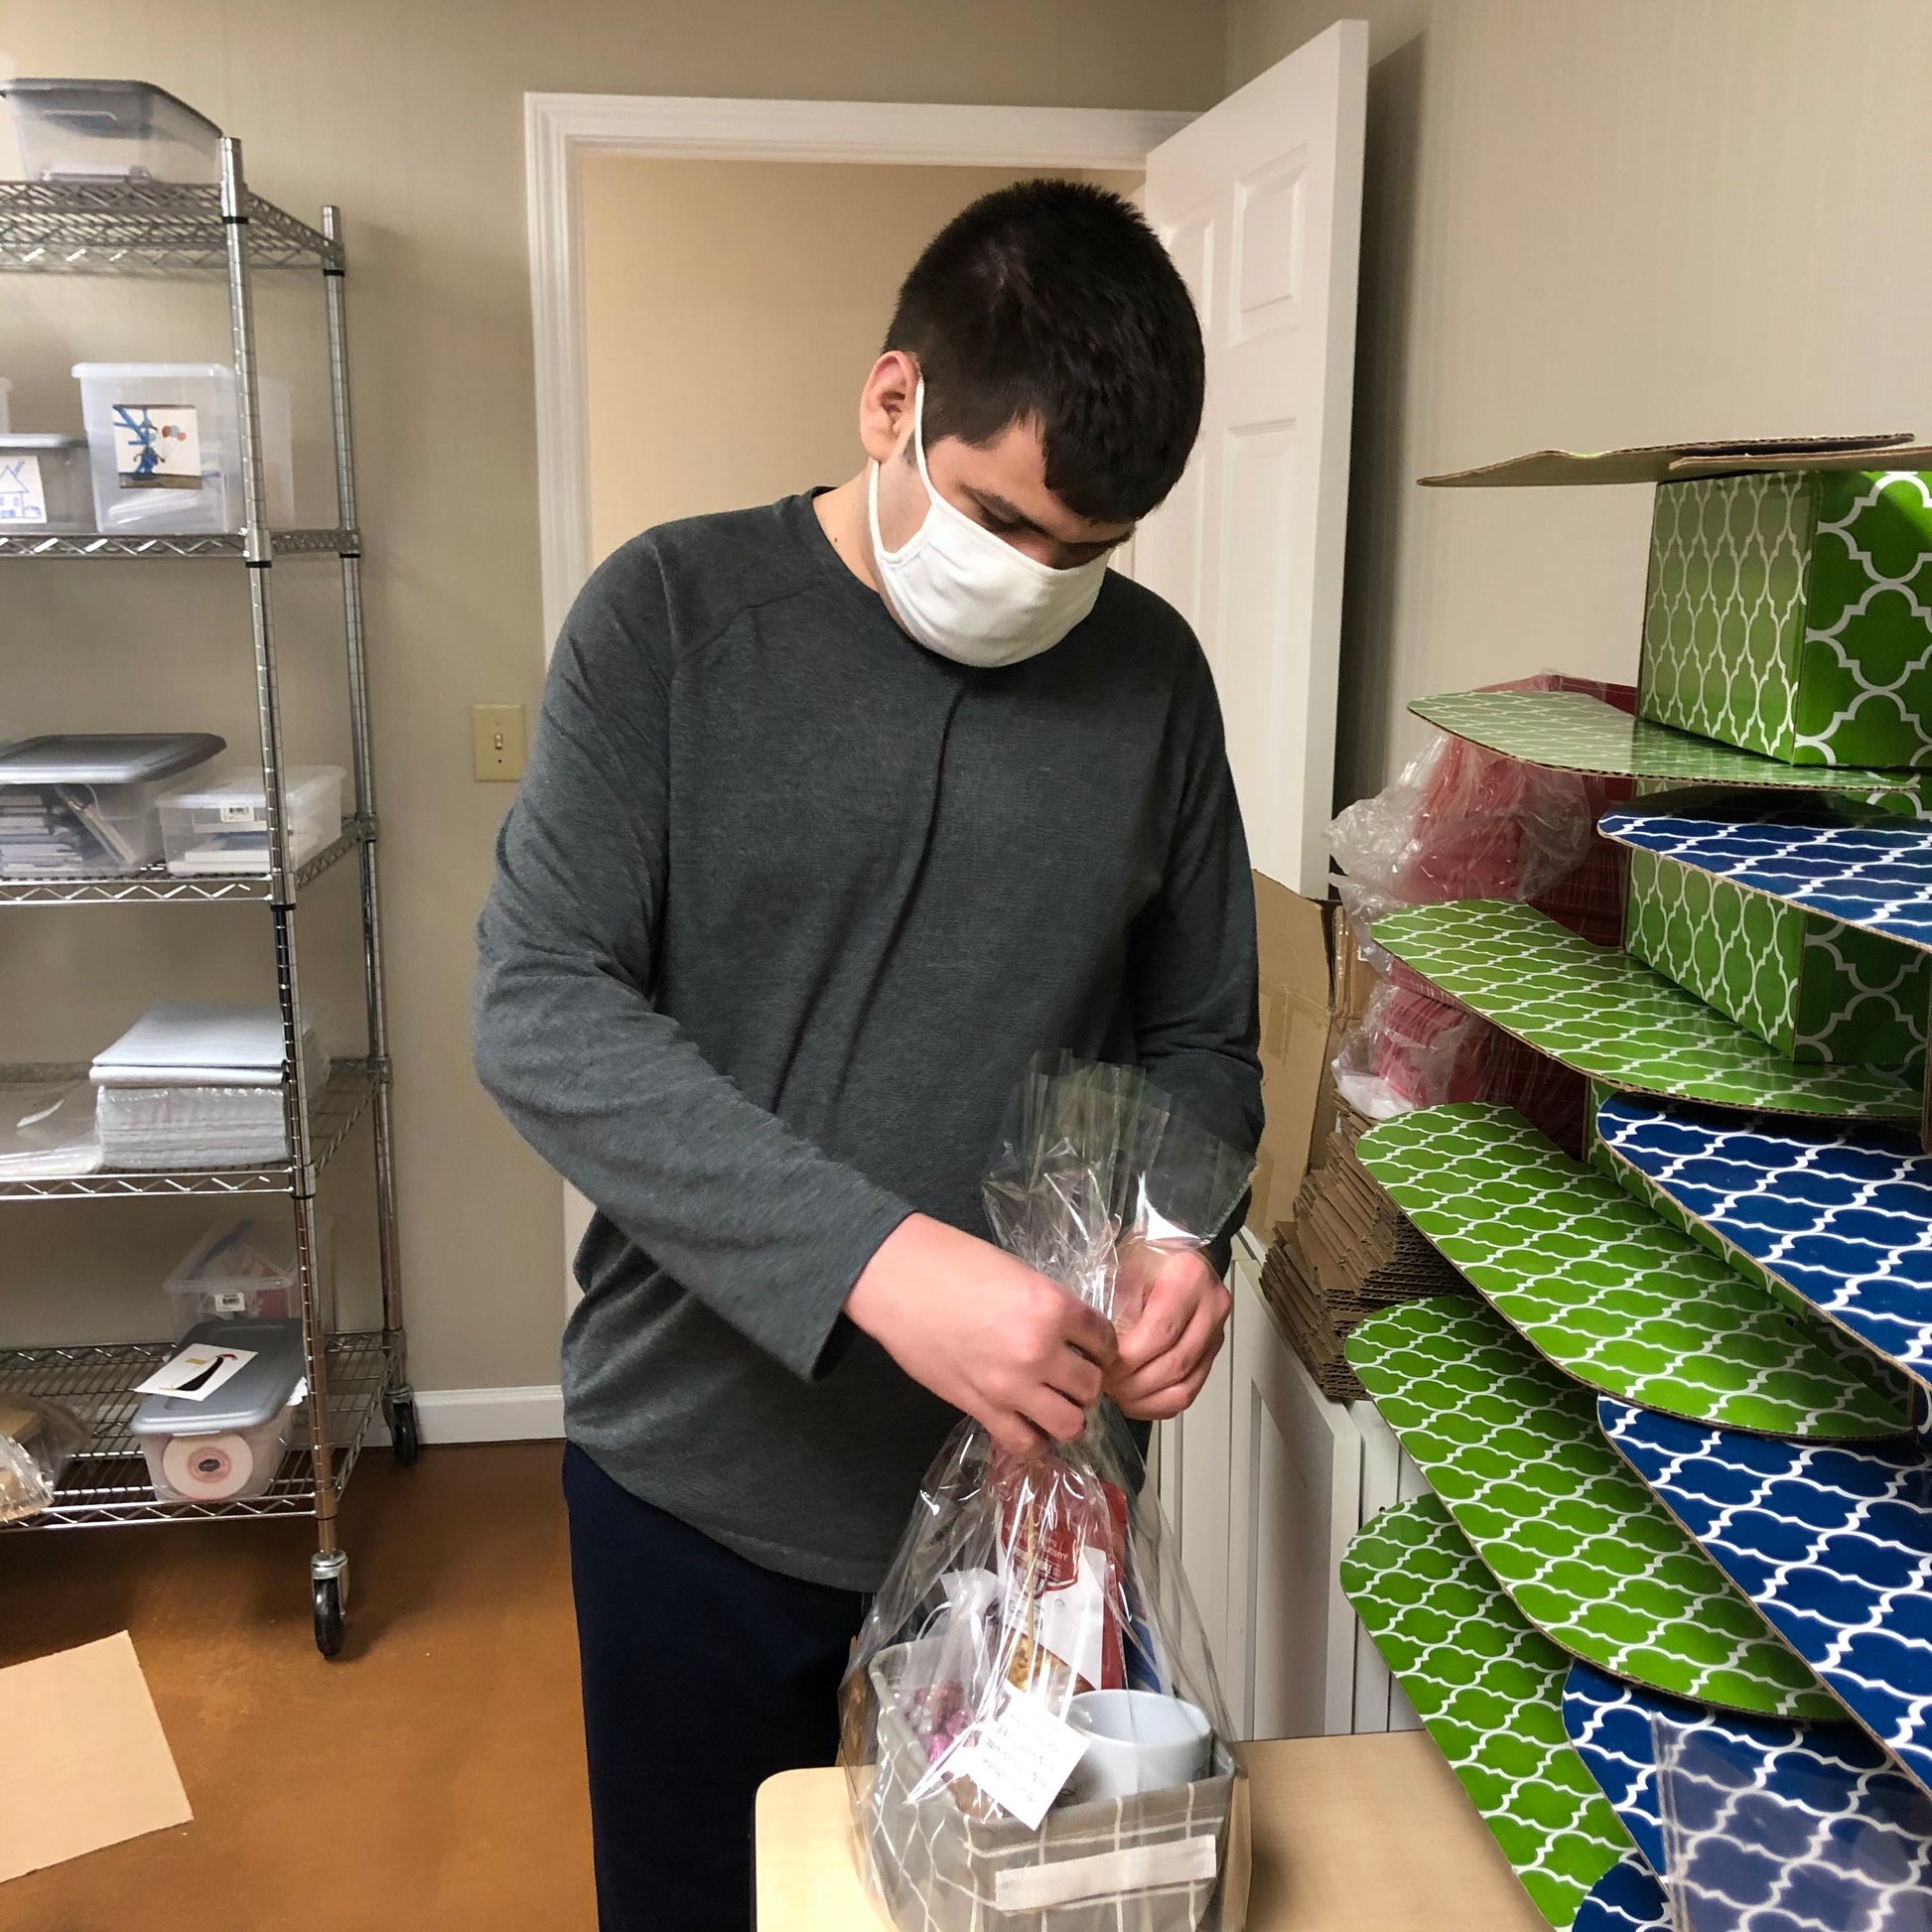 A disabled business owner with a gray shirt tying a ribbon on a "Just Because" gift basket while standing in an inventory room